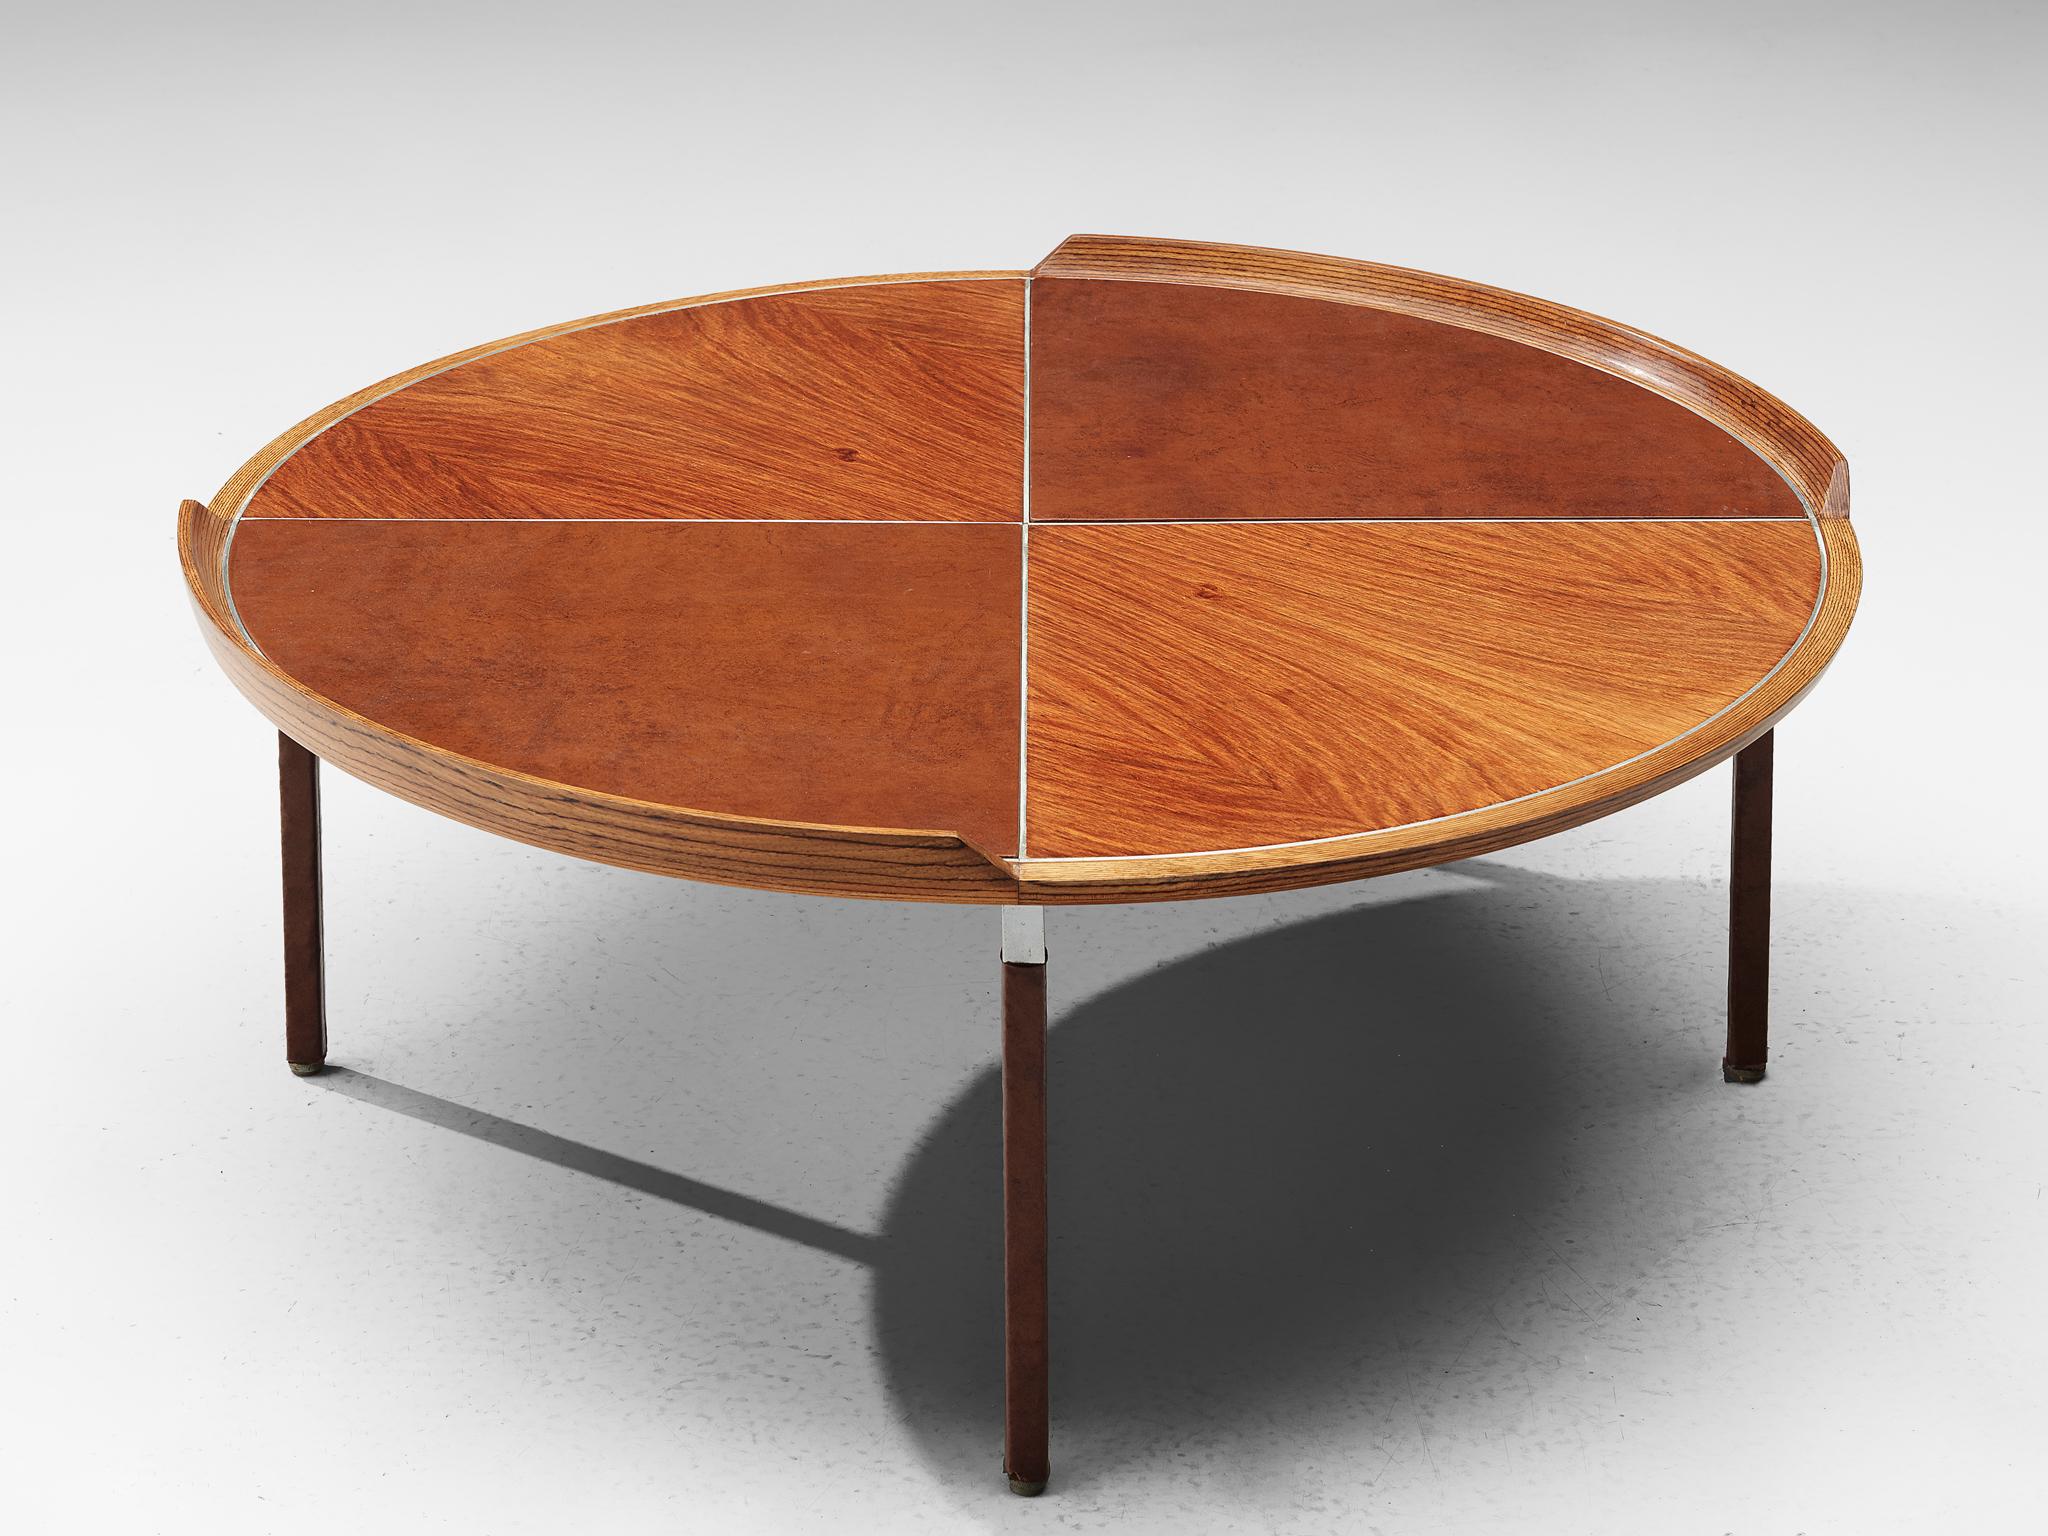 De Coene, rare coffee table made for expo BXL, mahogany and aluminum, Belgium, 1958.

Beautiful round coffee table finished with mahogany veneer and very nice details on the tabletop. The frame where the tabletop lies on is made of aluminum. This